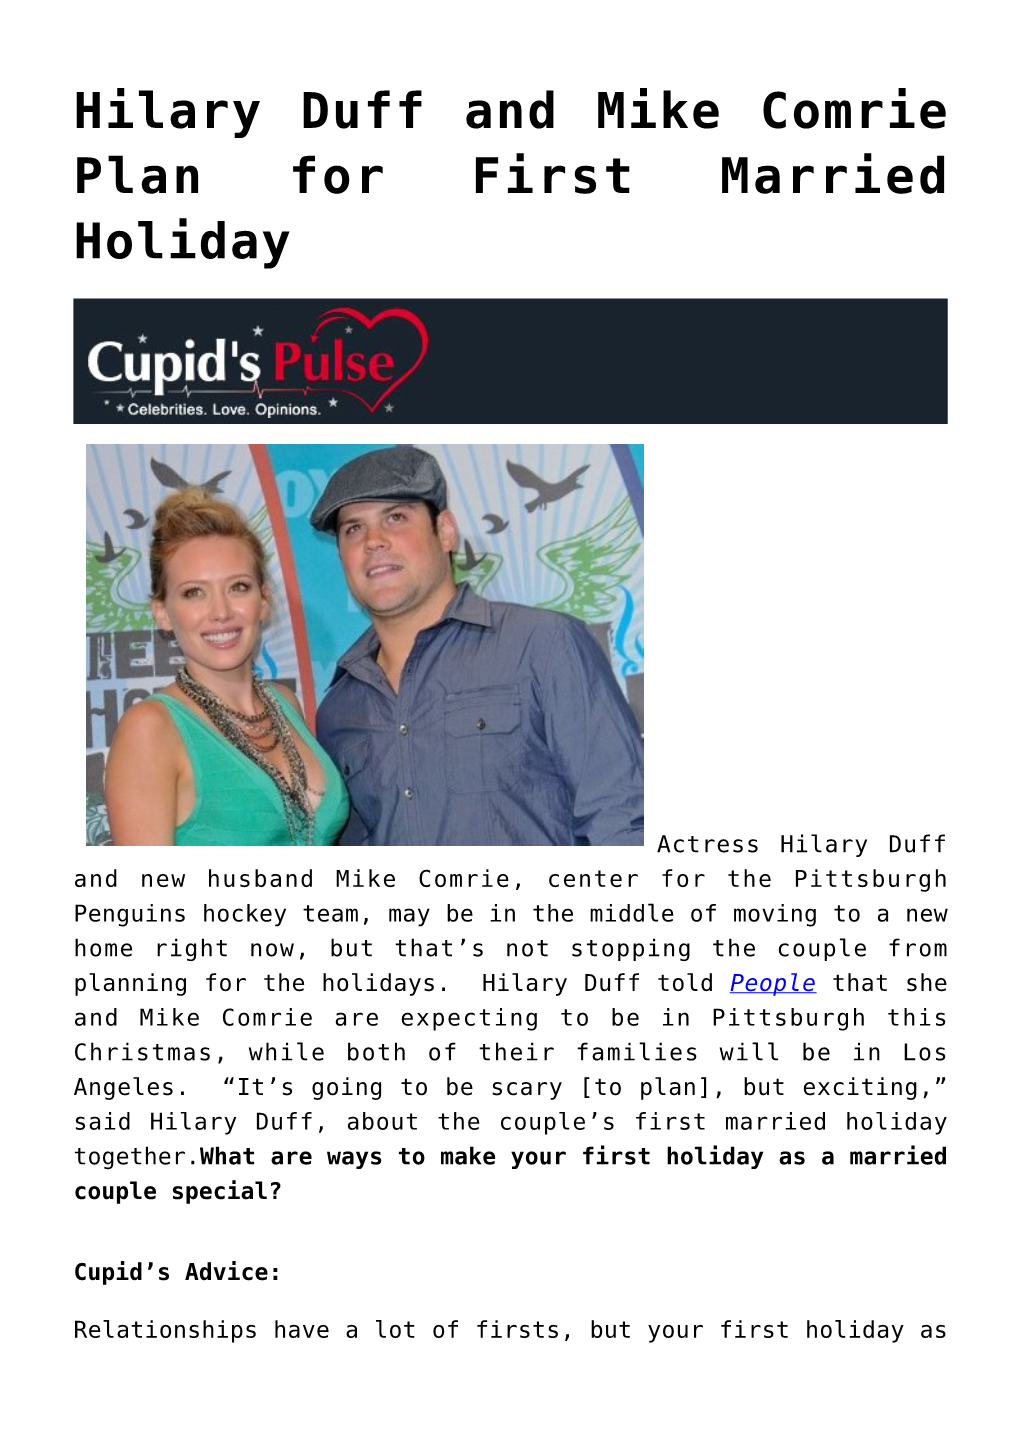 Mike Comrie Signed a Prenup,Hilary Duff's